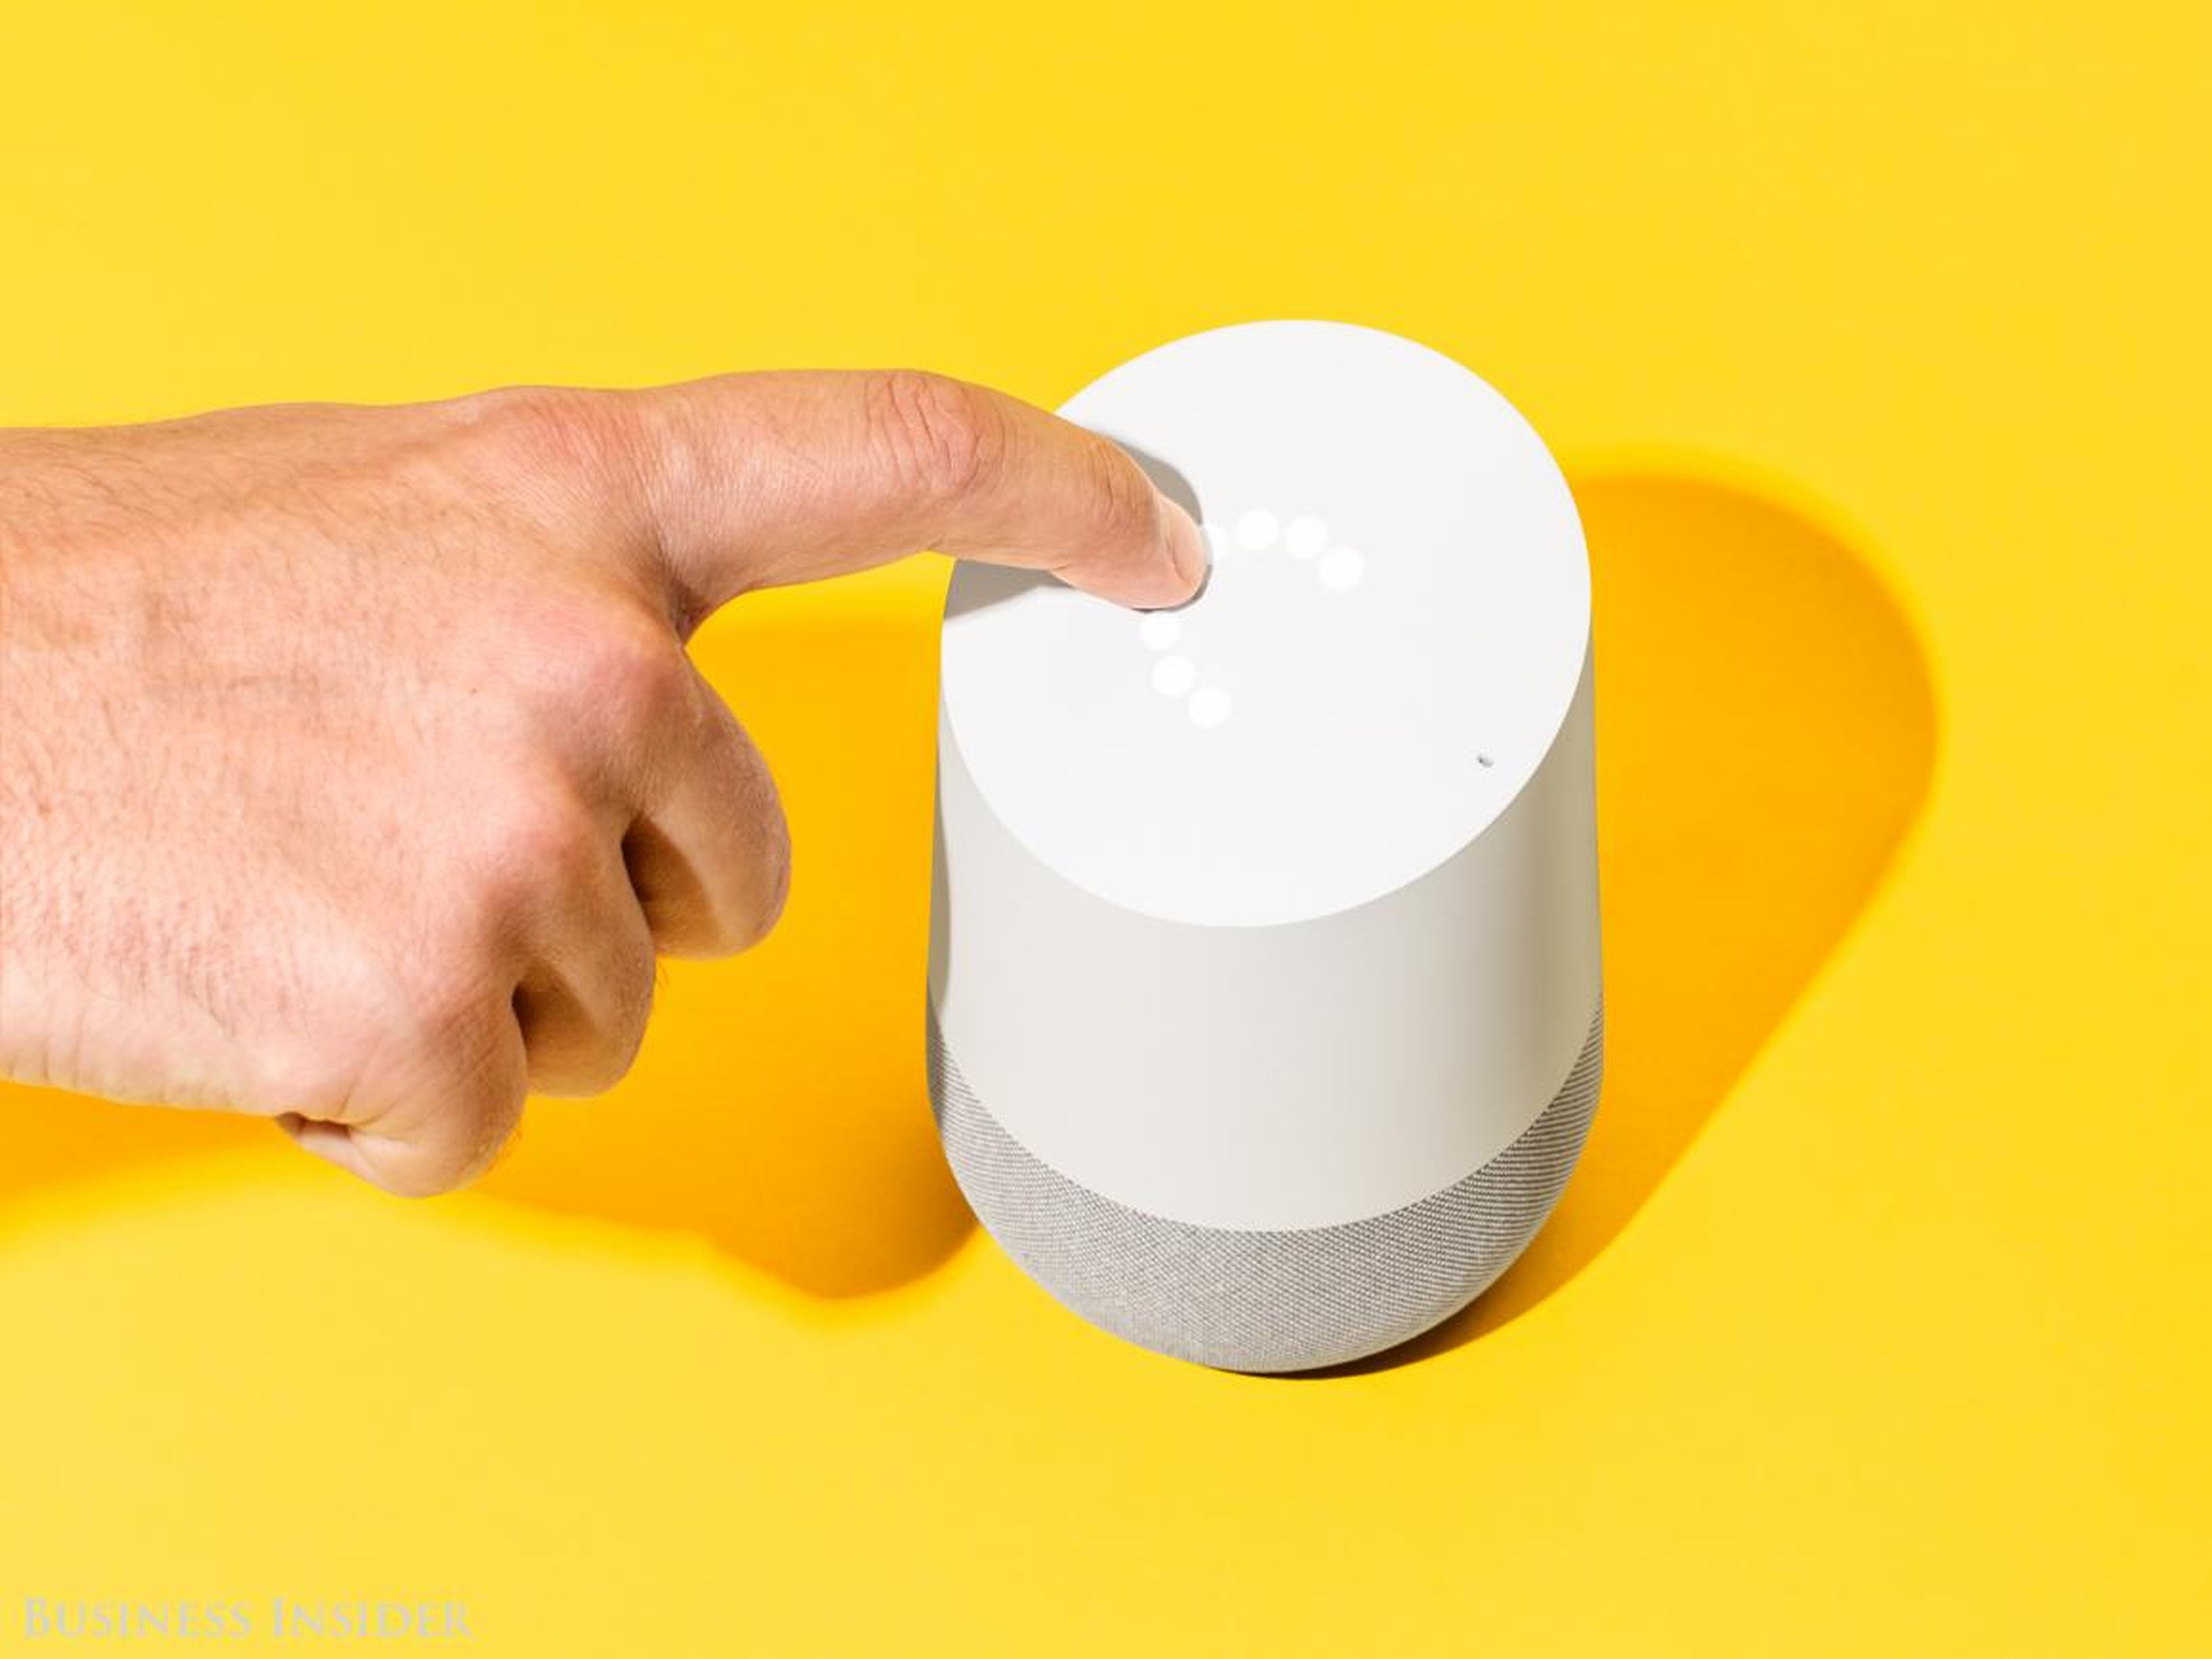 Google Assistant and Google Home won't work properly if you completely disable Google's location tracking